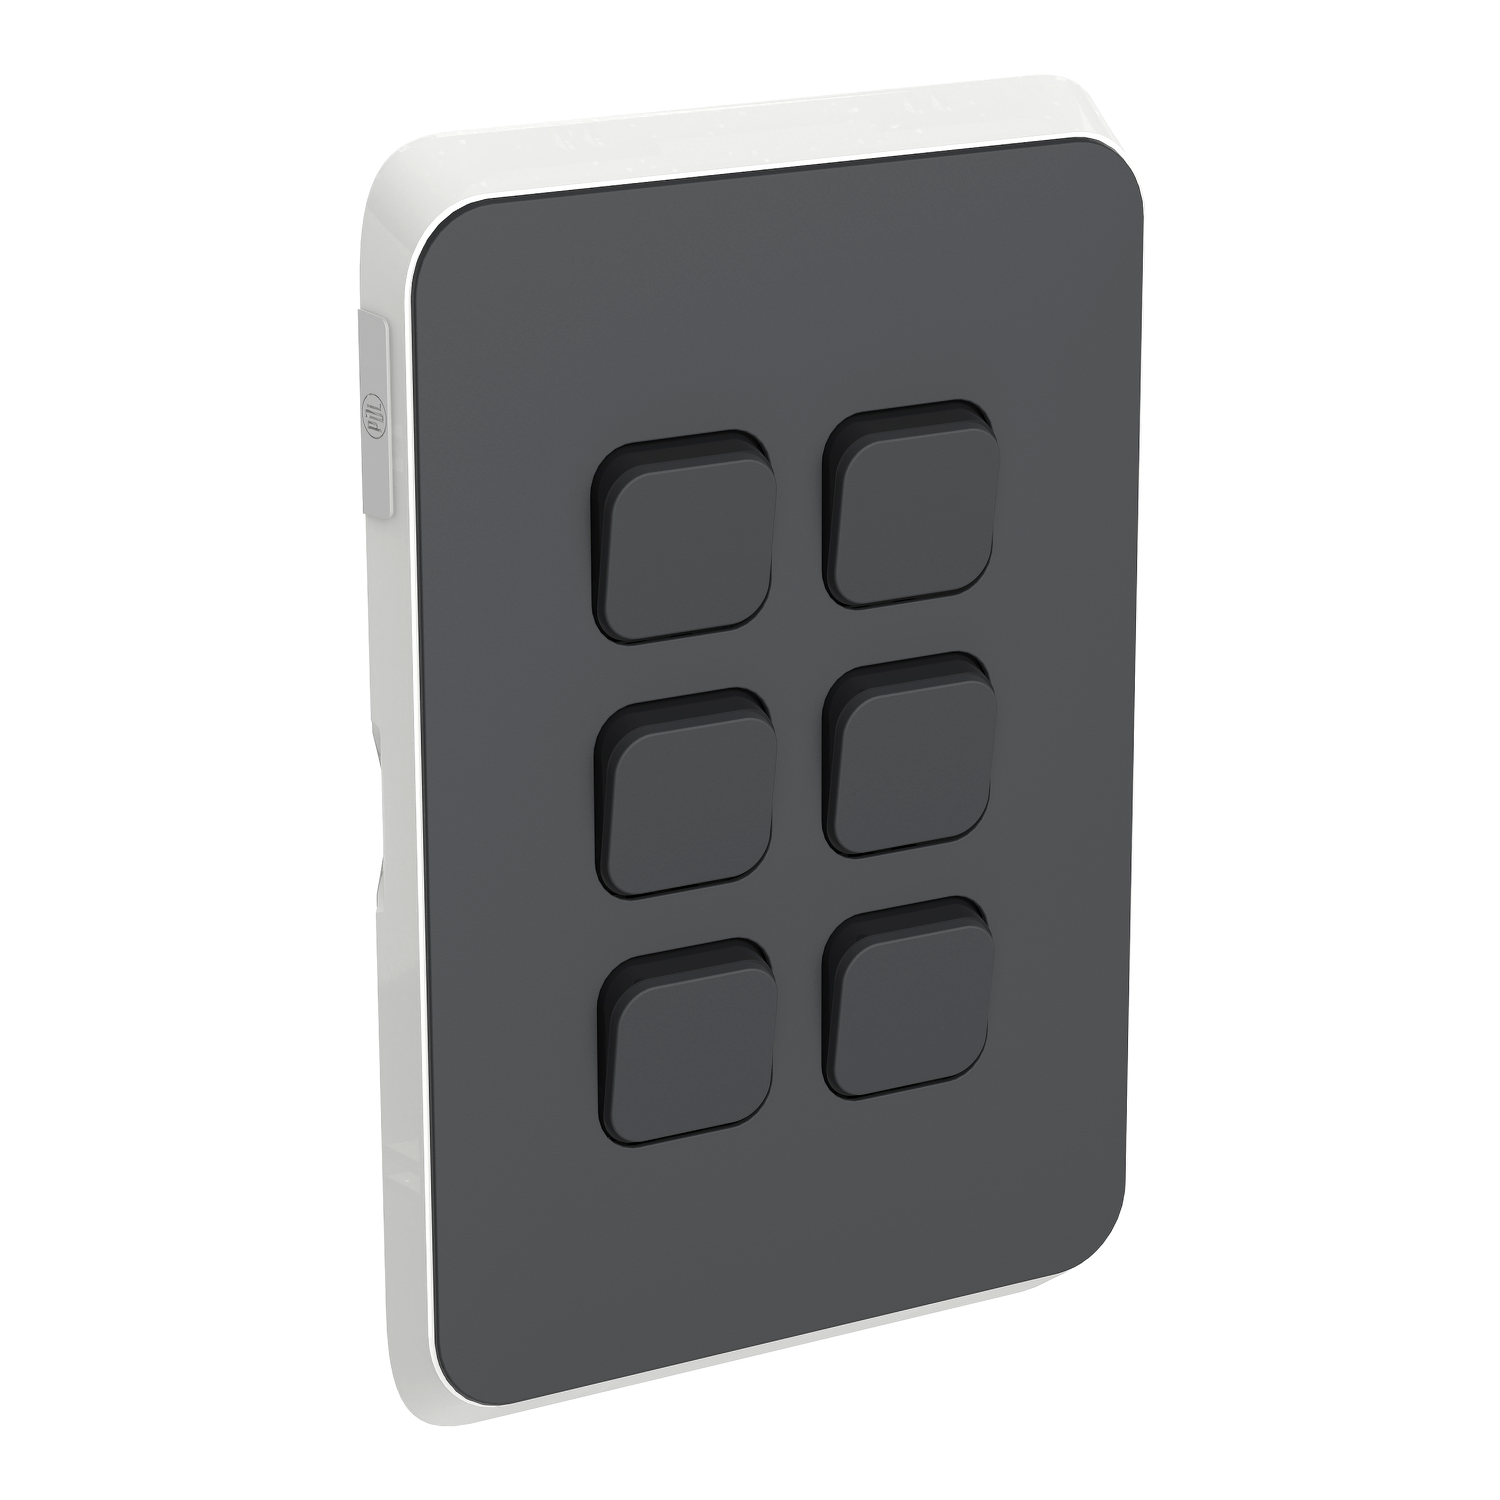 PDL Iconic - Cover Plate Switch 6-Gang - Anthracite